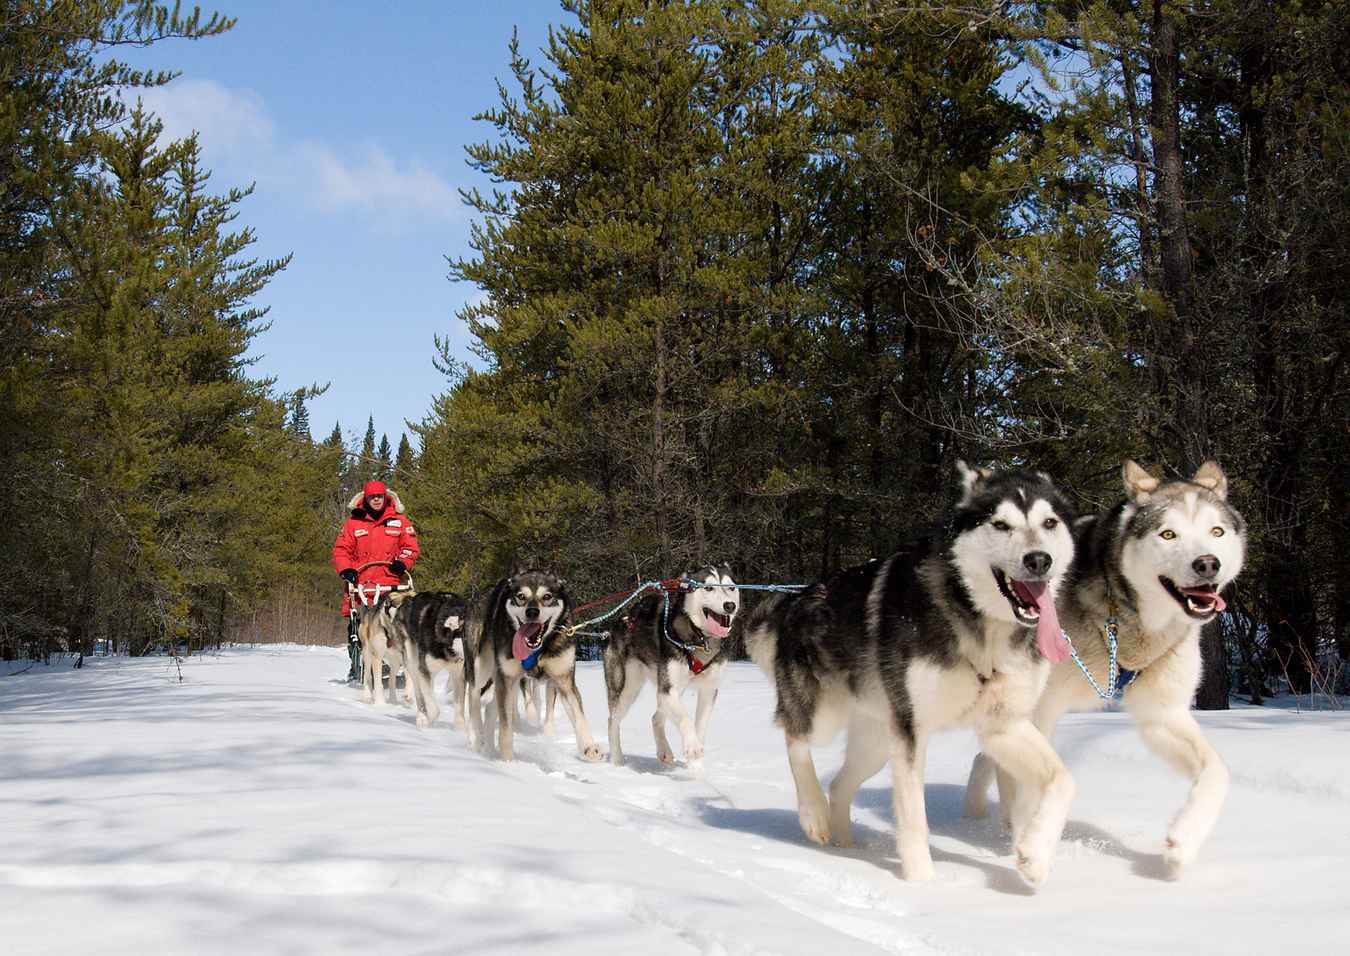 Dogs pulling a sled at Anglin Lake in Saskatchewan